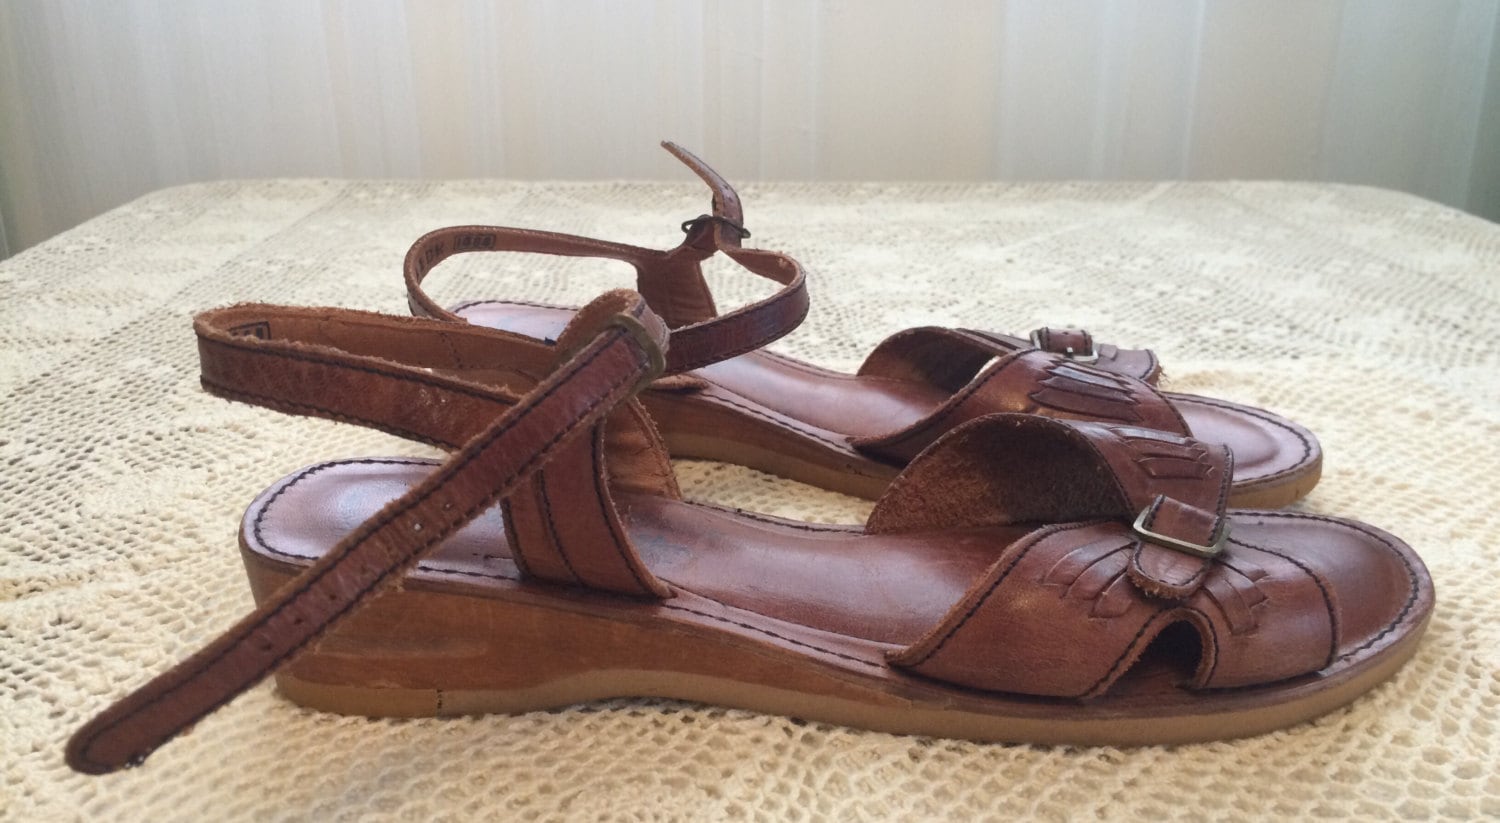 CHIC 70s 80s Vintage Thom McAn Woven brown Leather Sandals